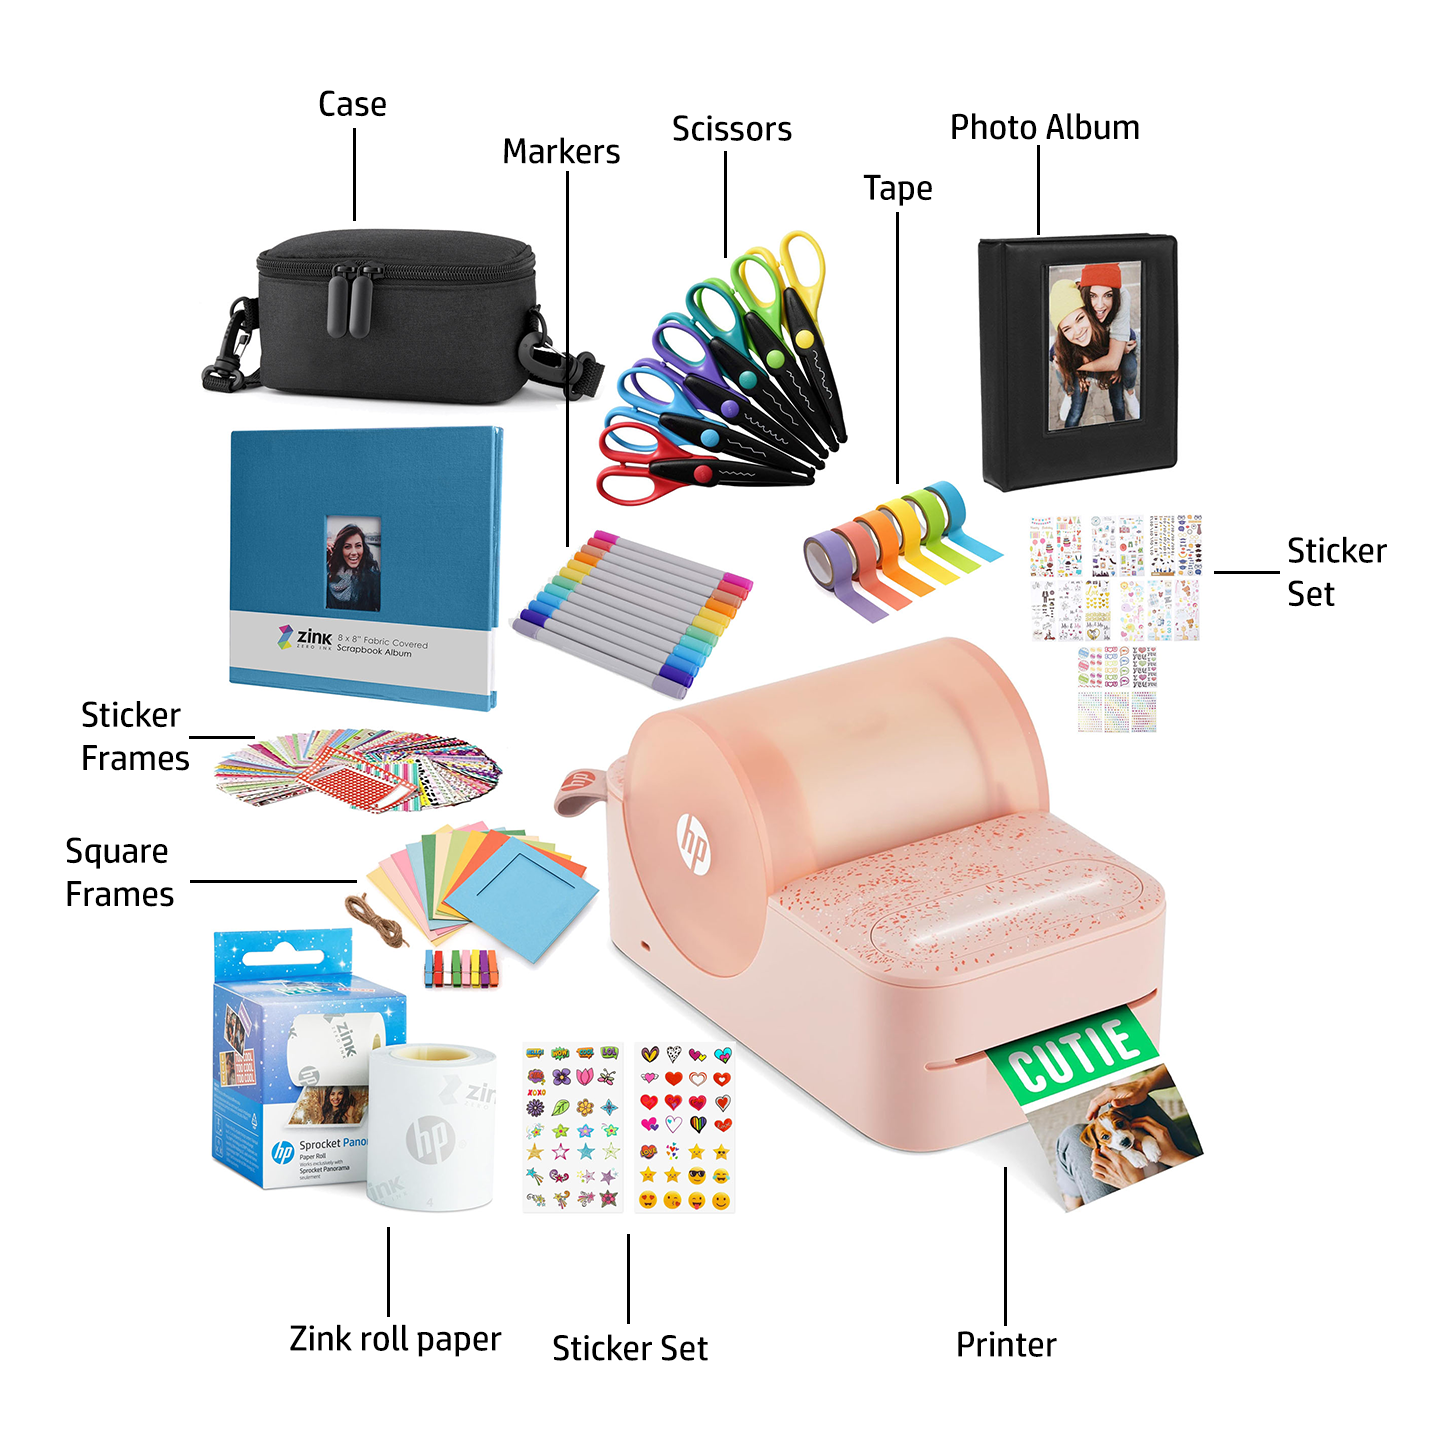 HP Sprocket Panorama Instant Portable Color Label & Photo Printer (Pink) Craft Bundle with case, HP Zink roll, photo album, markers, scissors, tape, stickers and frames Sprocket Printers CA